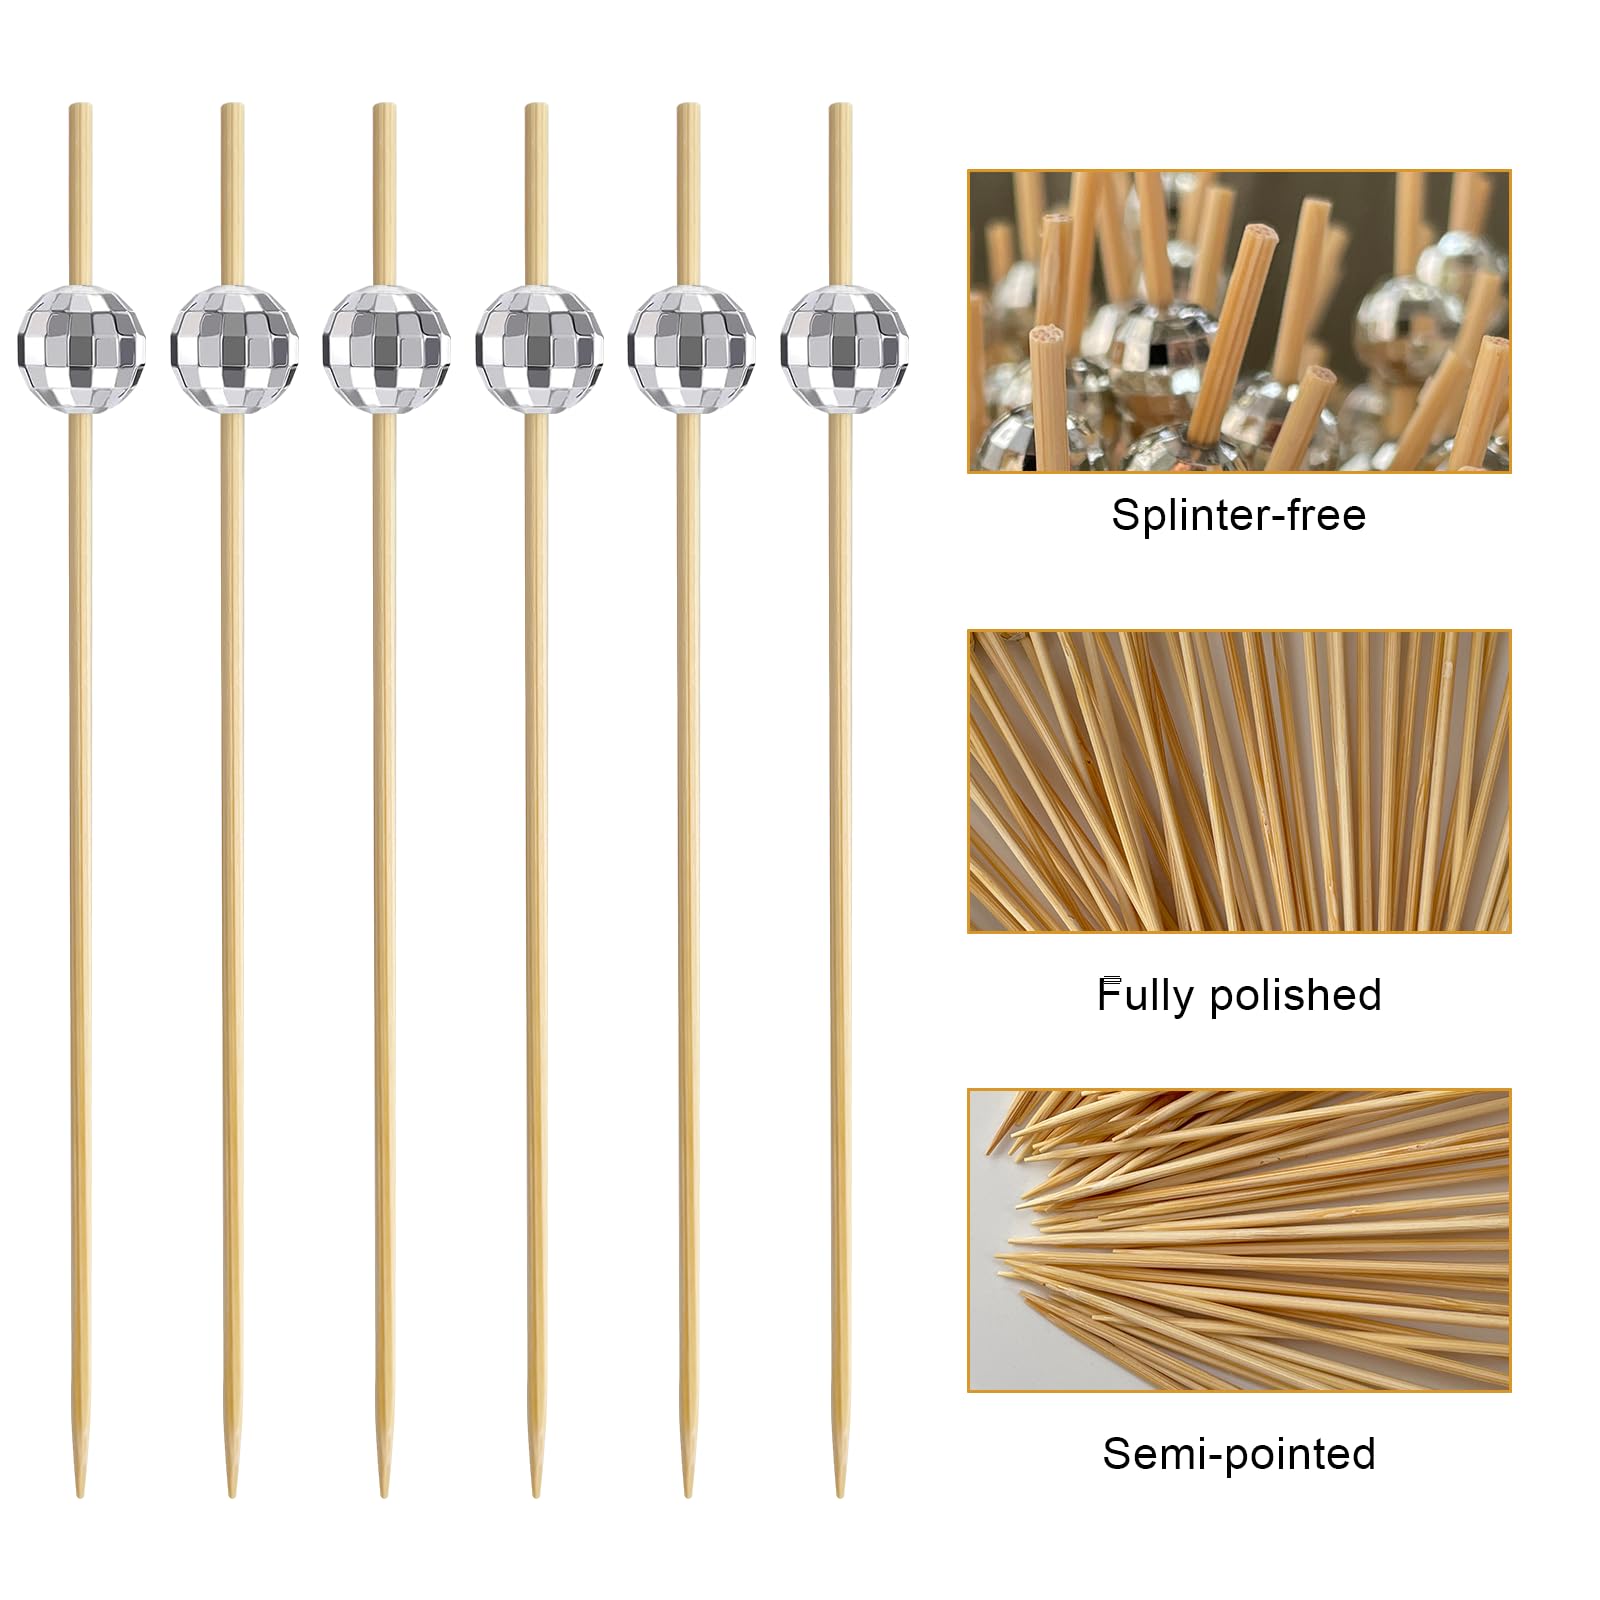 CasaPopz 200 Pcs Disco Ball Cocktail Picks Party Decor with Silver Bamboo Toothpicks Stirrers Skewers Sticks for Appetizers Cupcakes Party Supplies for Christmas, Wedding, and Birthday Decorations